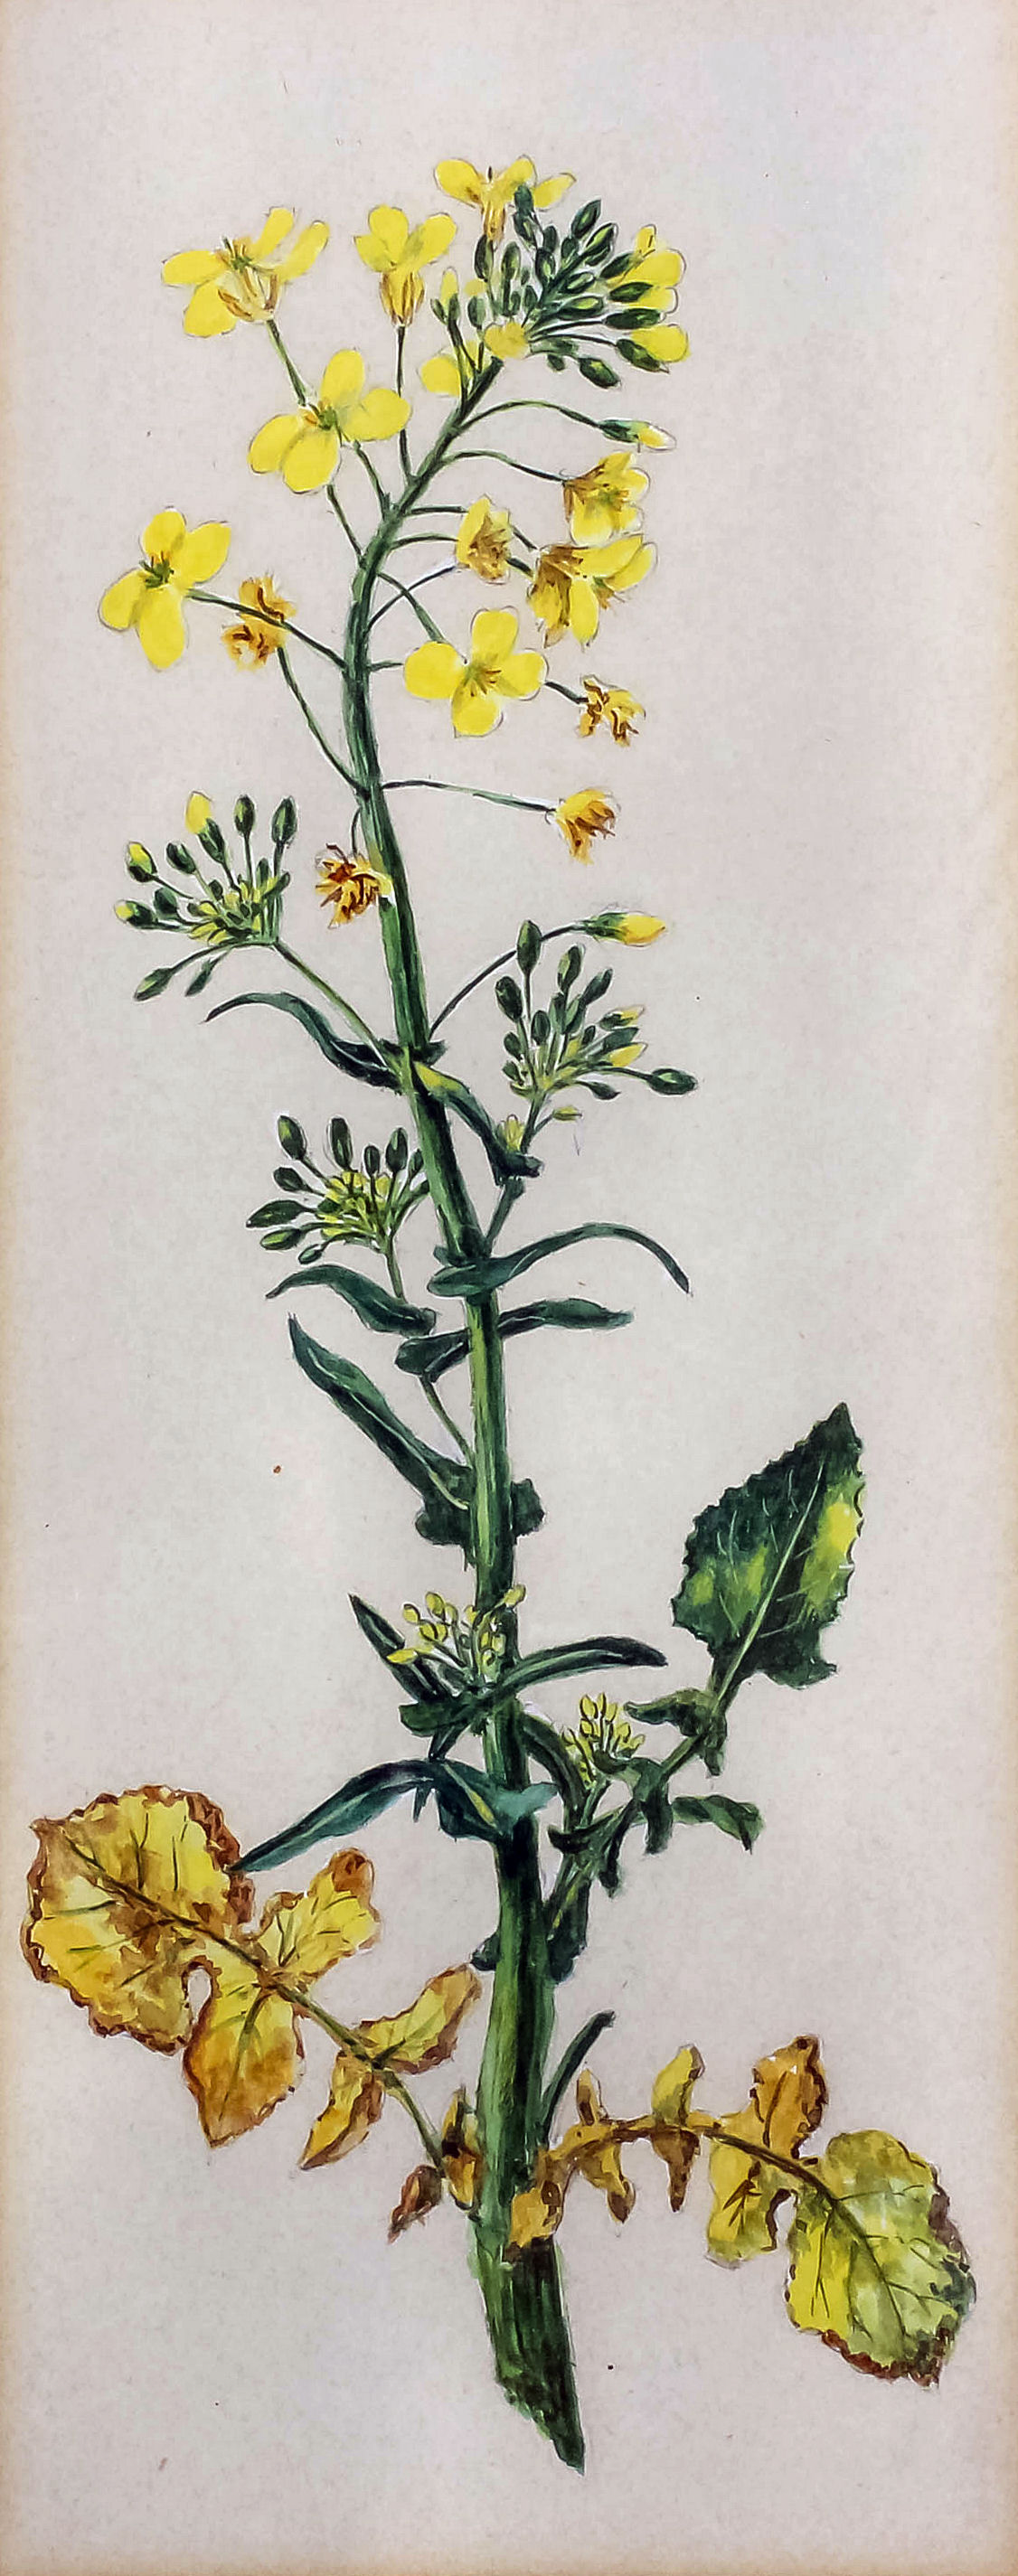 Attributed to Frederic Peter Layard (1818-?) - Ten watercolours - Botanical studies - Including "